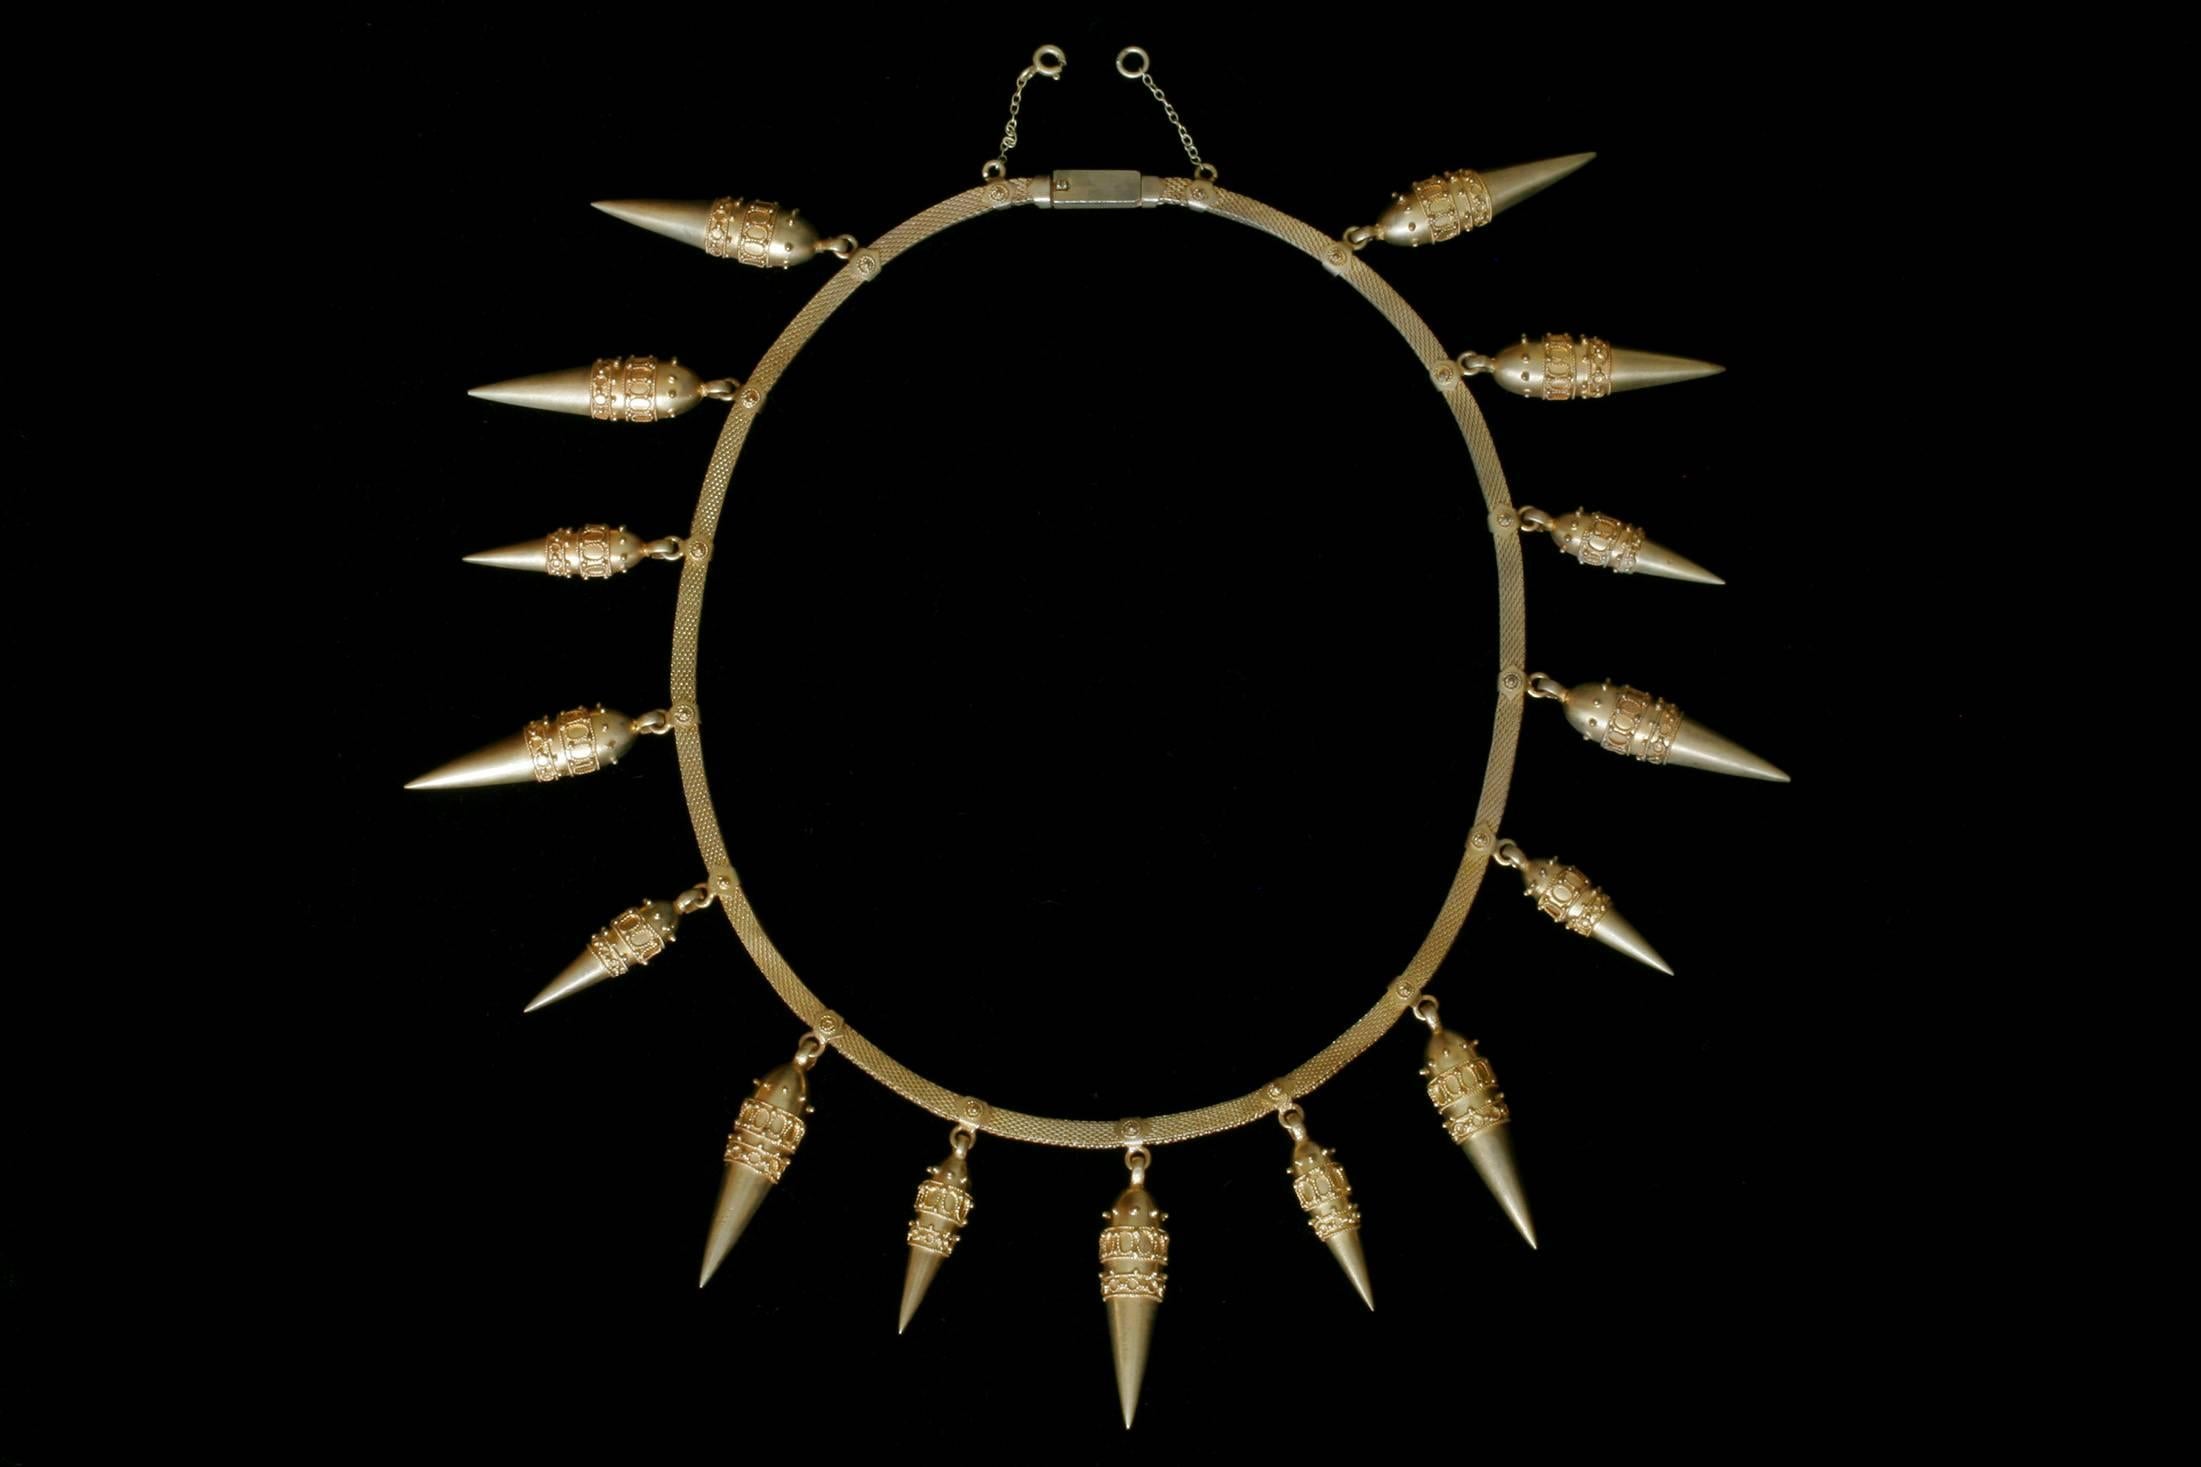 A very impressive and rare Victorian Etruscan revival collar. The necklace contains 15 beautiful amphorae around the neckline. An amphora is a motif from the ancient Greek and Etruscan civilizations that was widely and fashionably used in the